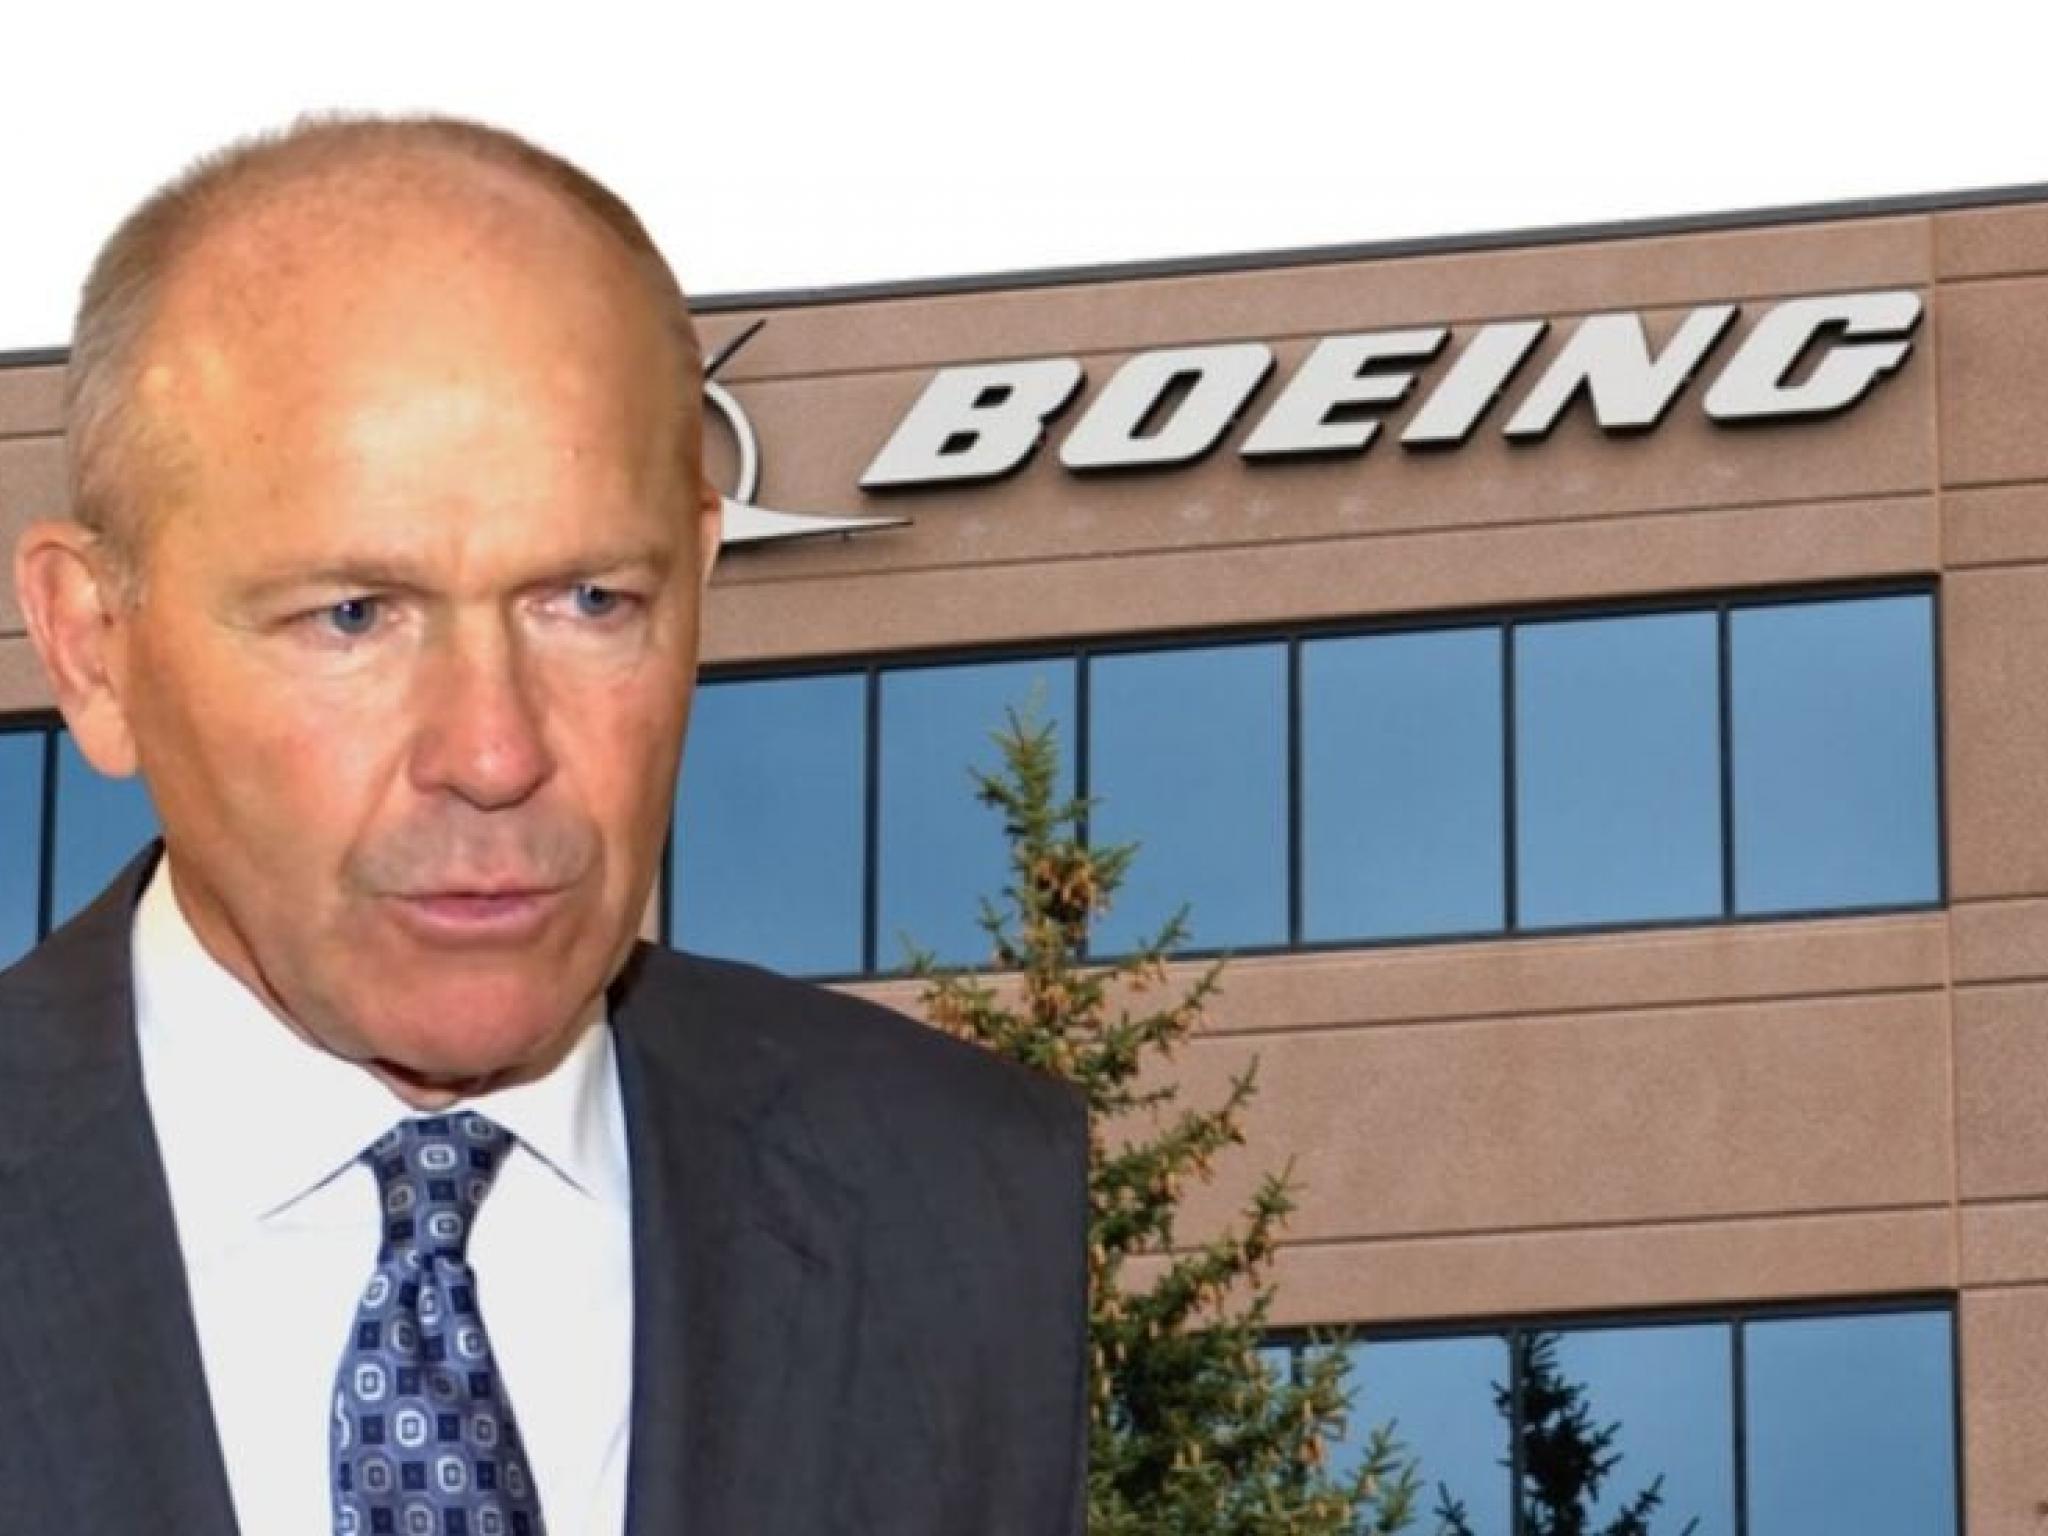  boeing-faces-high-stakes-decision-accept-plea-deal-or-risk-trial-over-737-max-safety-violations 